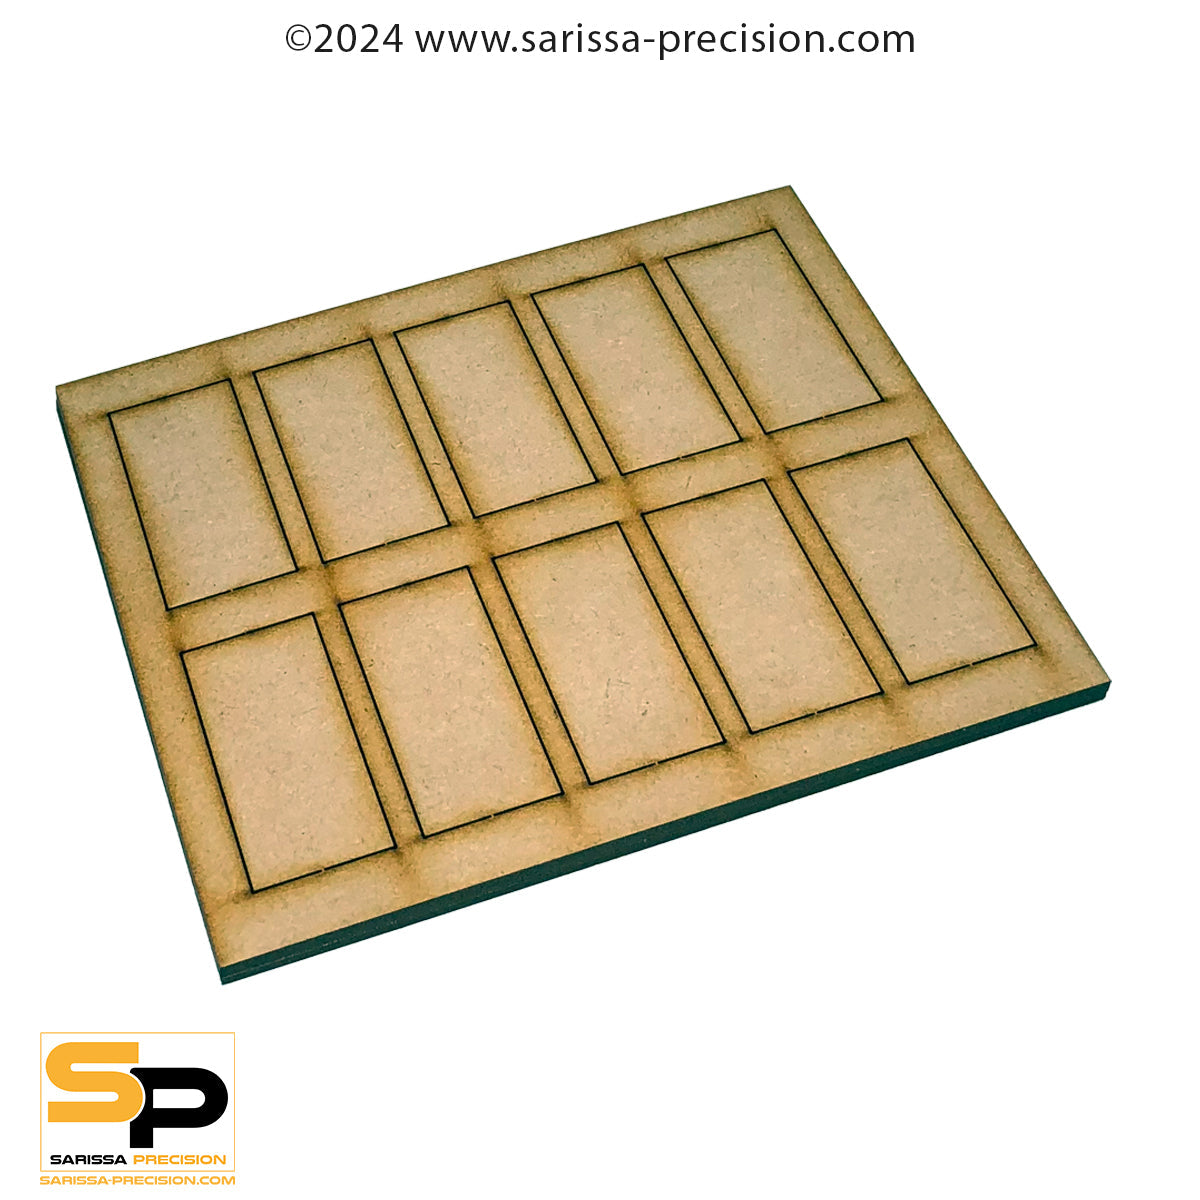 8 x 1 30x60mm Cavalry Conversion Tray for 25x50mm Bases